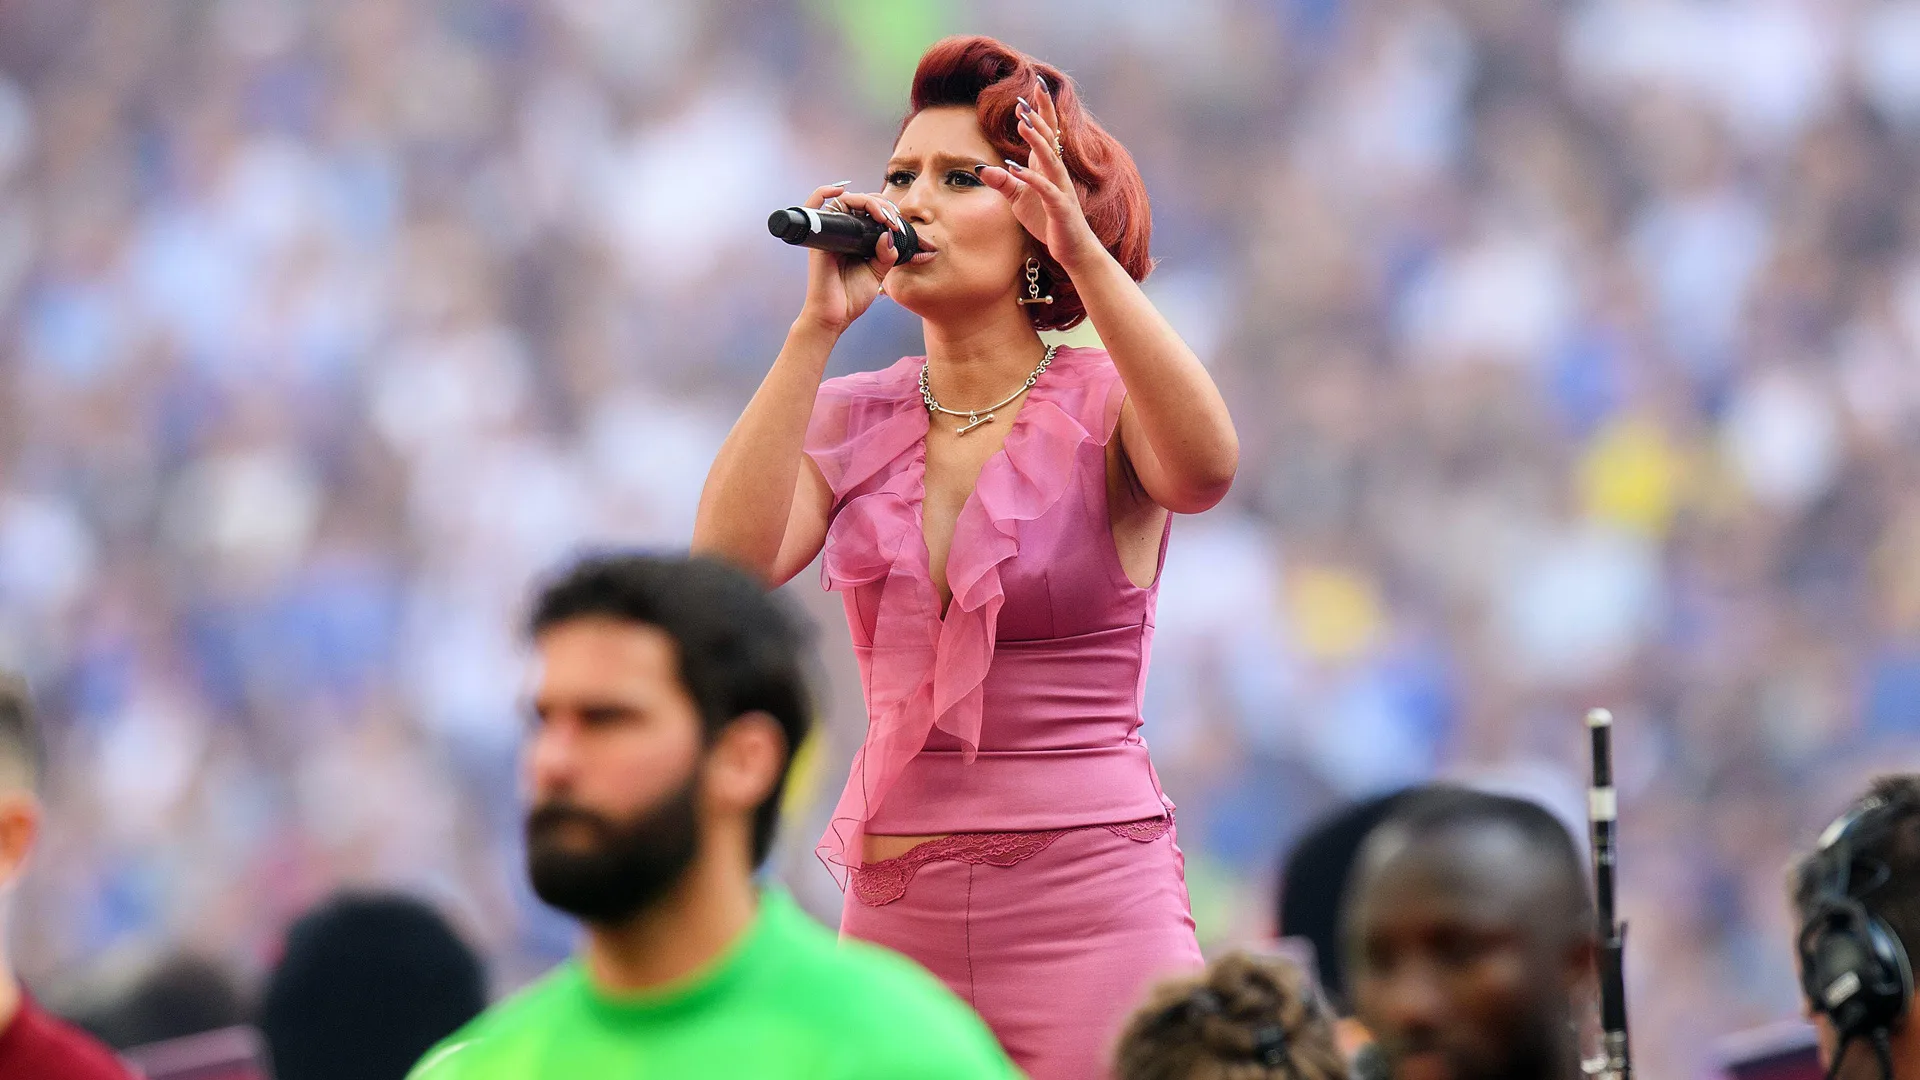 A photograph of Raye wearing a pink outfit singing to a crowd at a festival